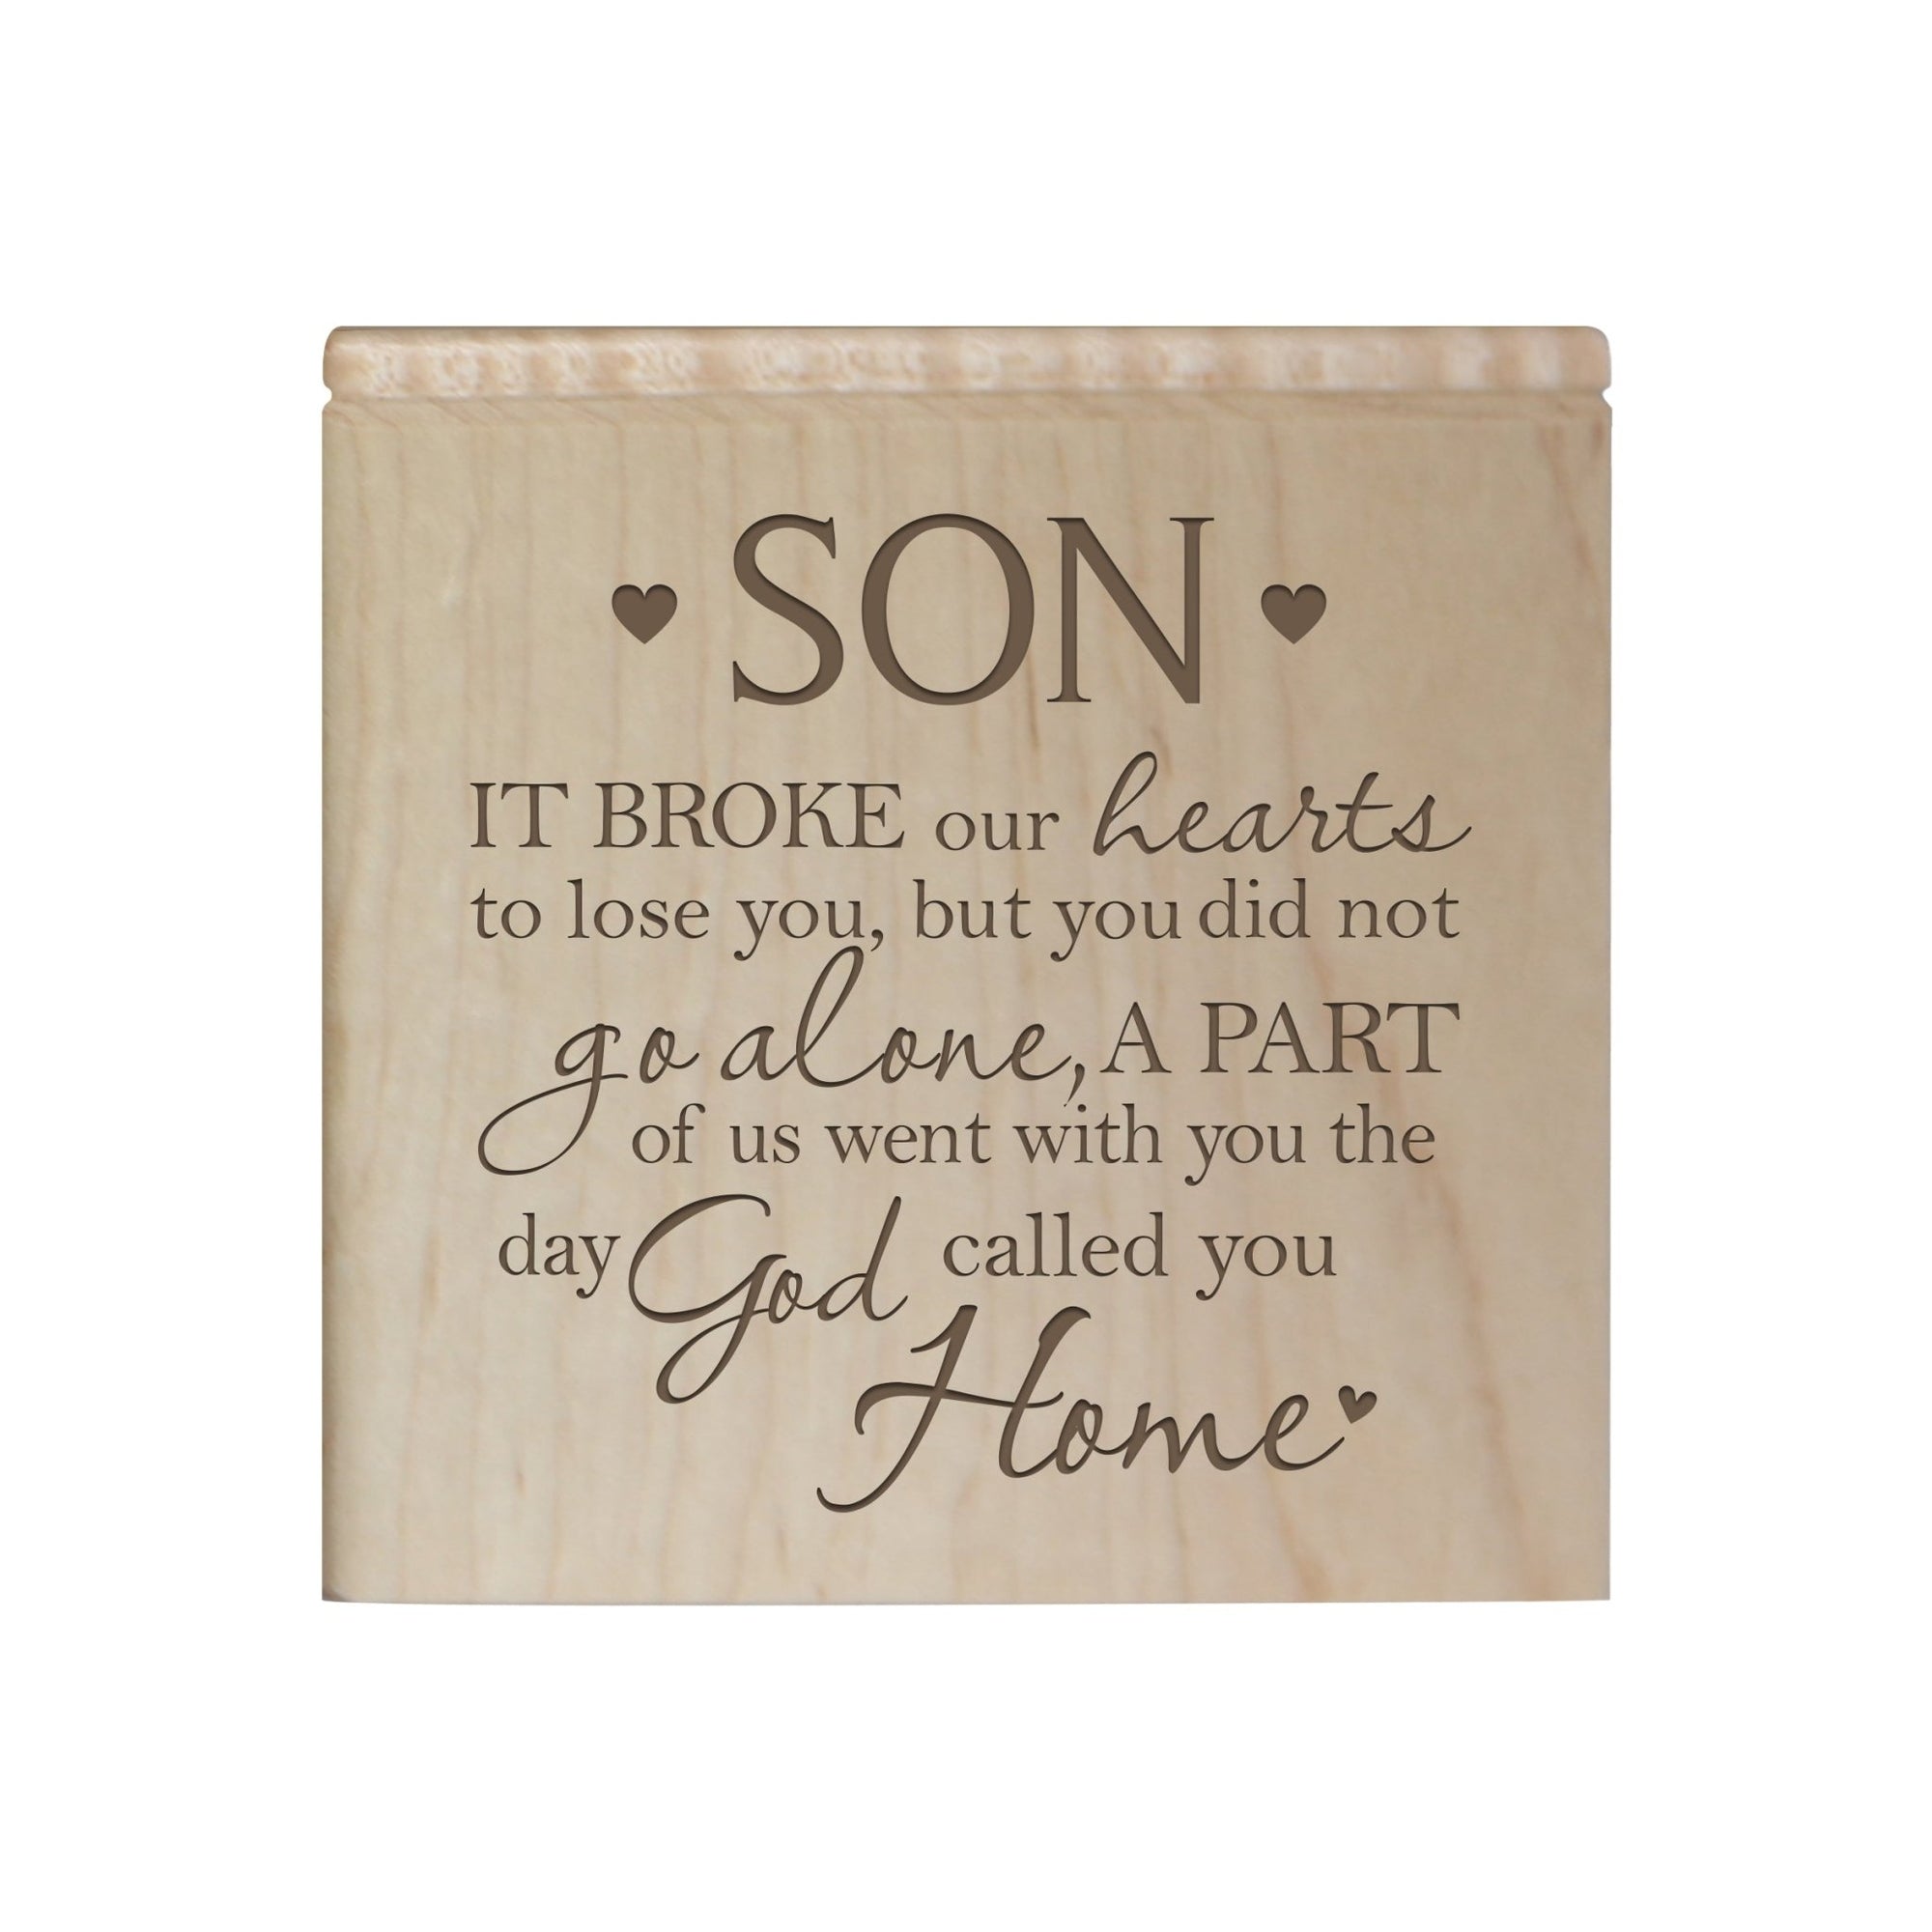 Modern Inspirational Memorial Wooden Cremation Urn Box 4.5x4.5in Holds 49 Cu Inches Of Human Ashes (It Broke Our Hearts Son) Funeral and Commemorative Keepsake - LifeSong Milestones